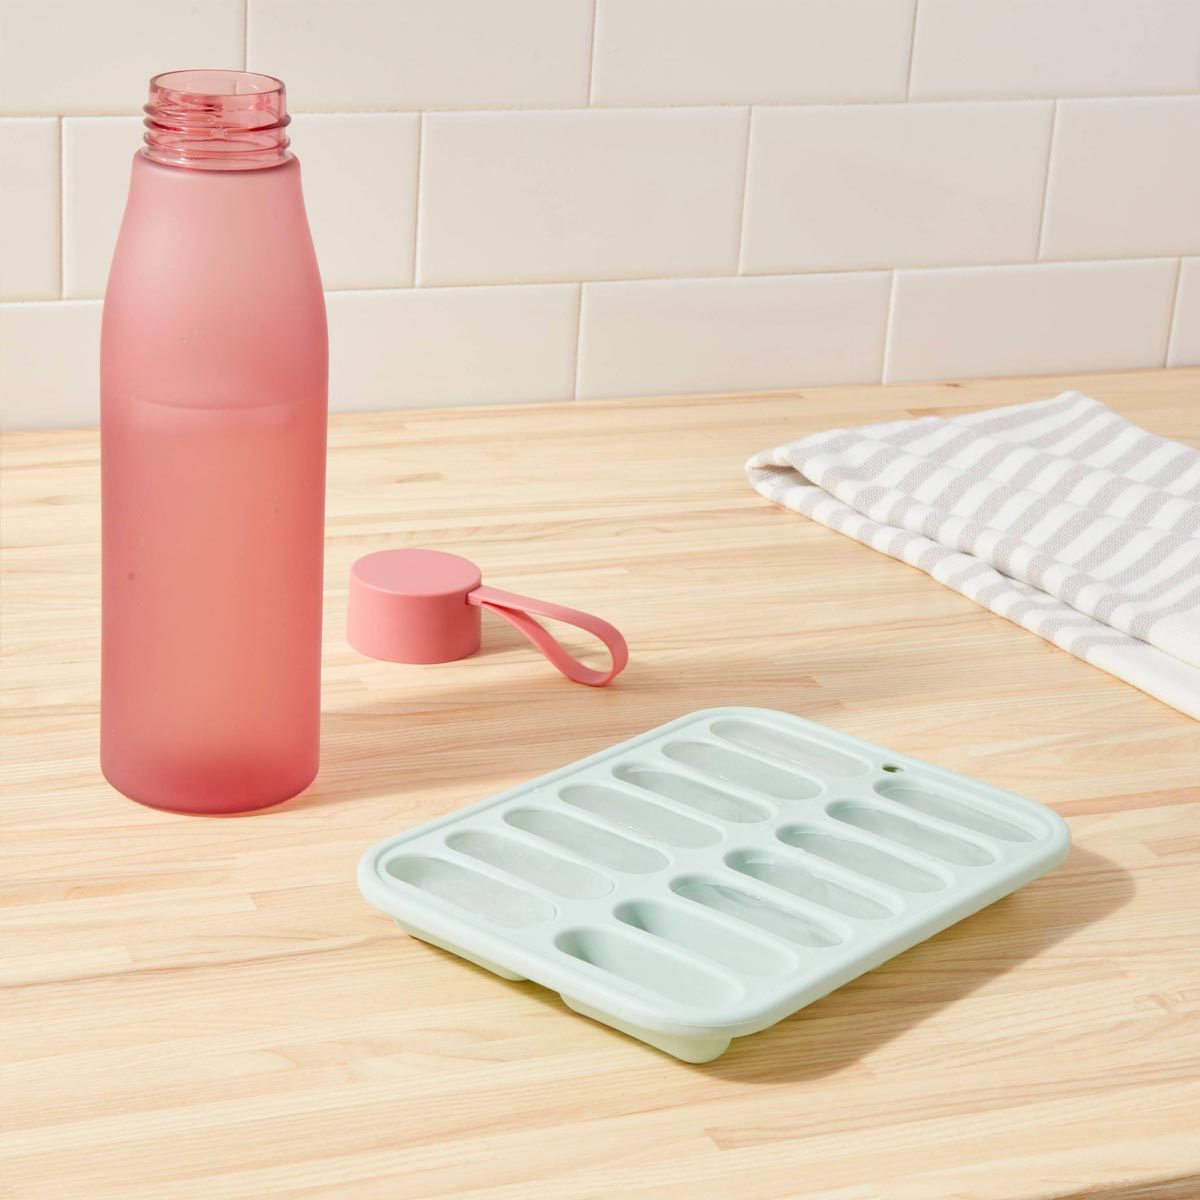 https://www.tasteofhome.com/wp-content/uploads/2019/05/silicone-ice-tray-ecomm-via-target.com_.jpg?fit=700%2C700